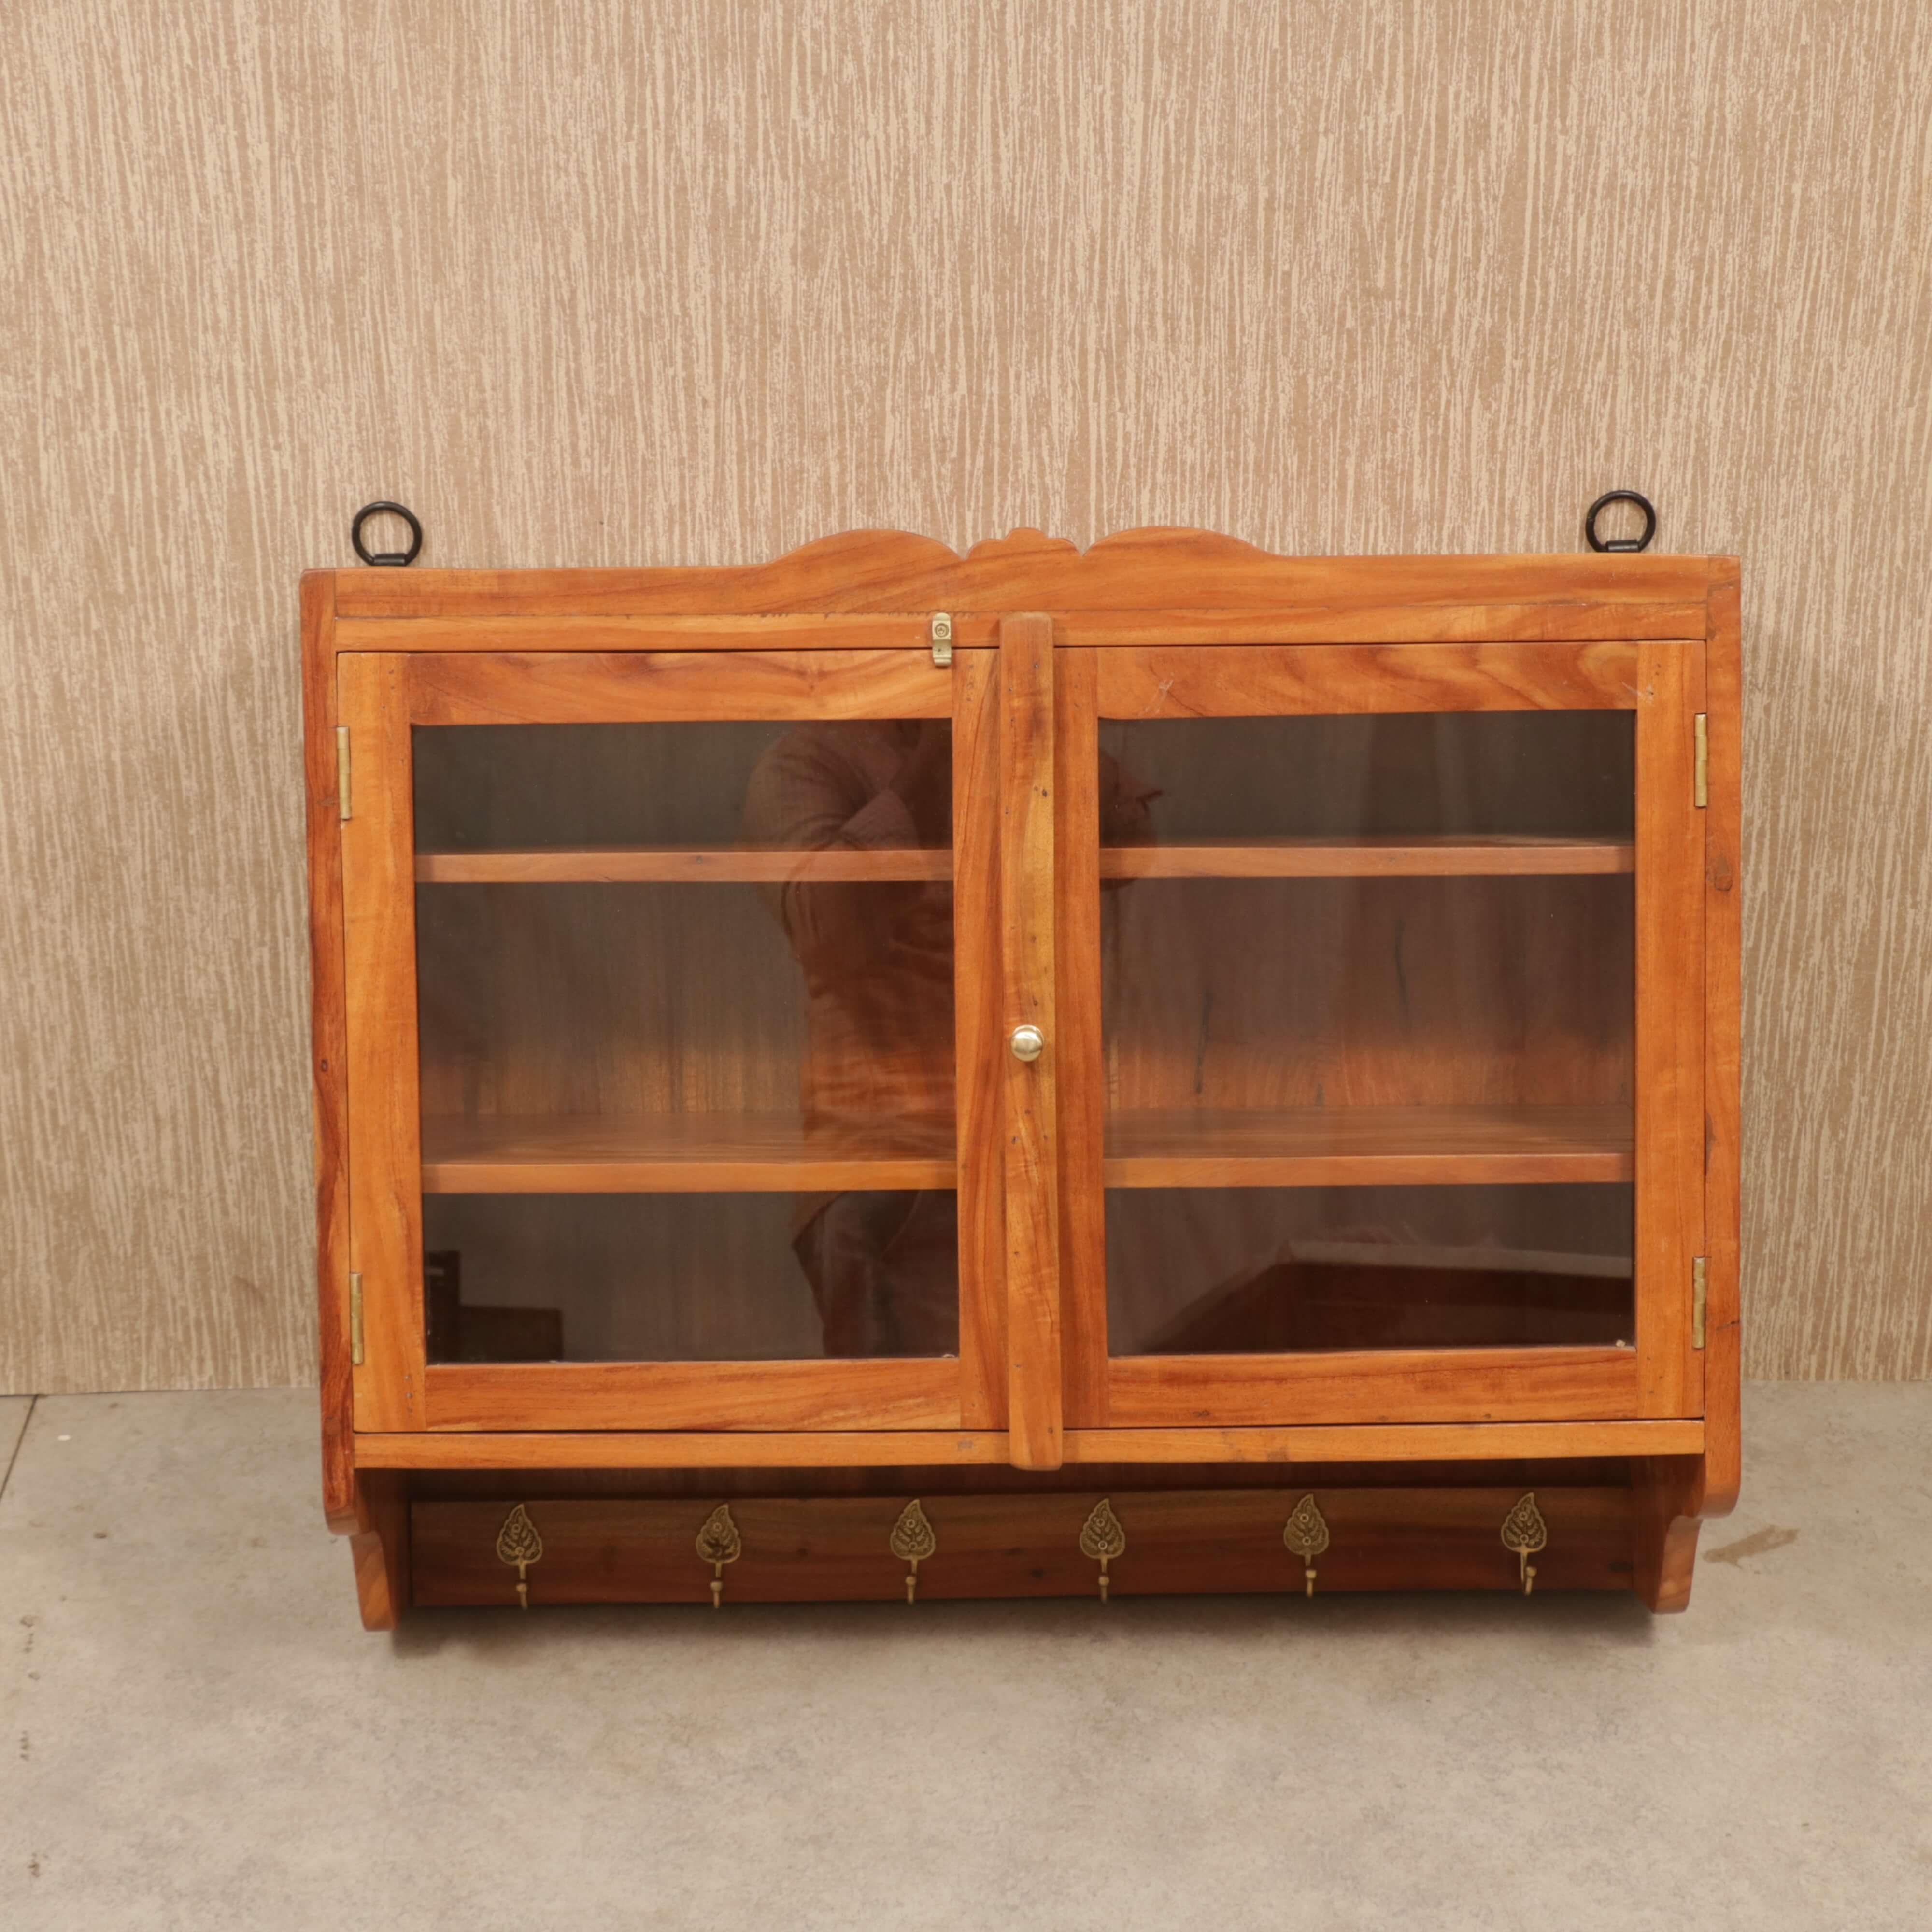 30 x 7 x 24 Inch Wide Wooden Hanging Cabinet Wall Cabinet